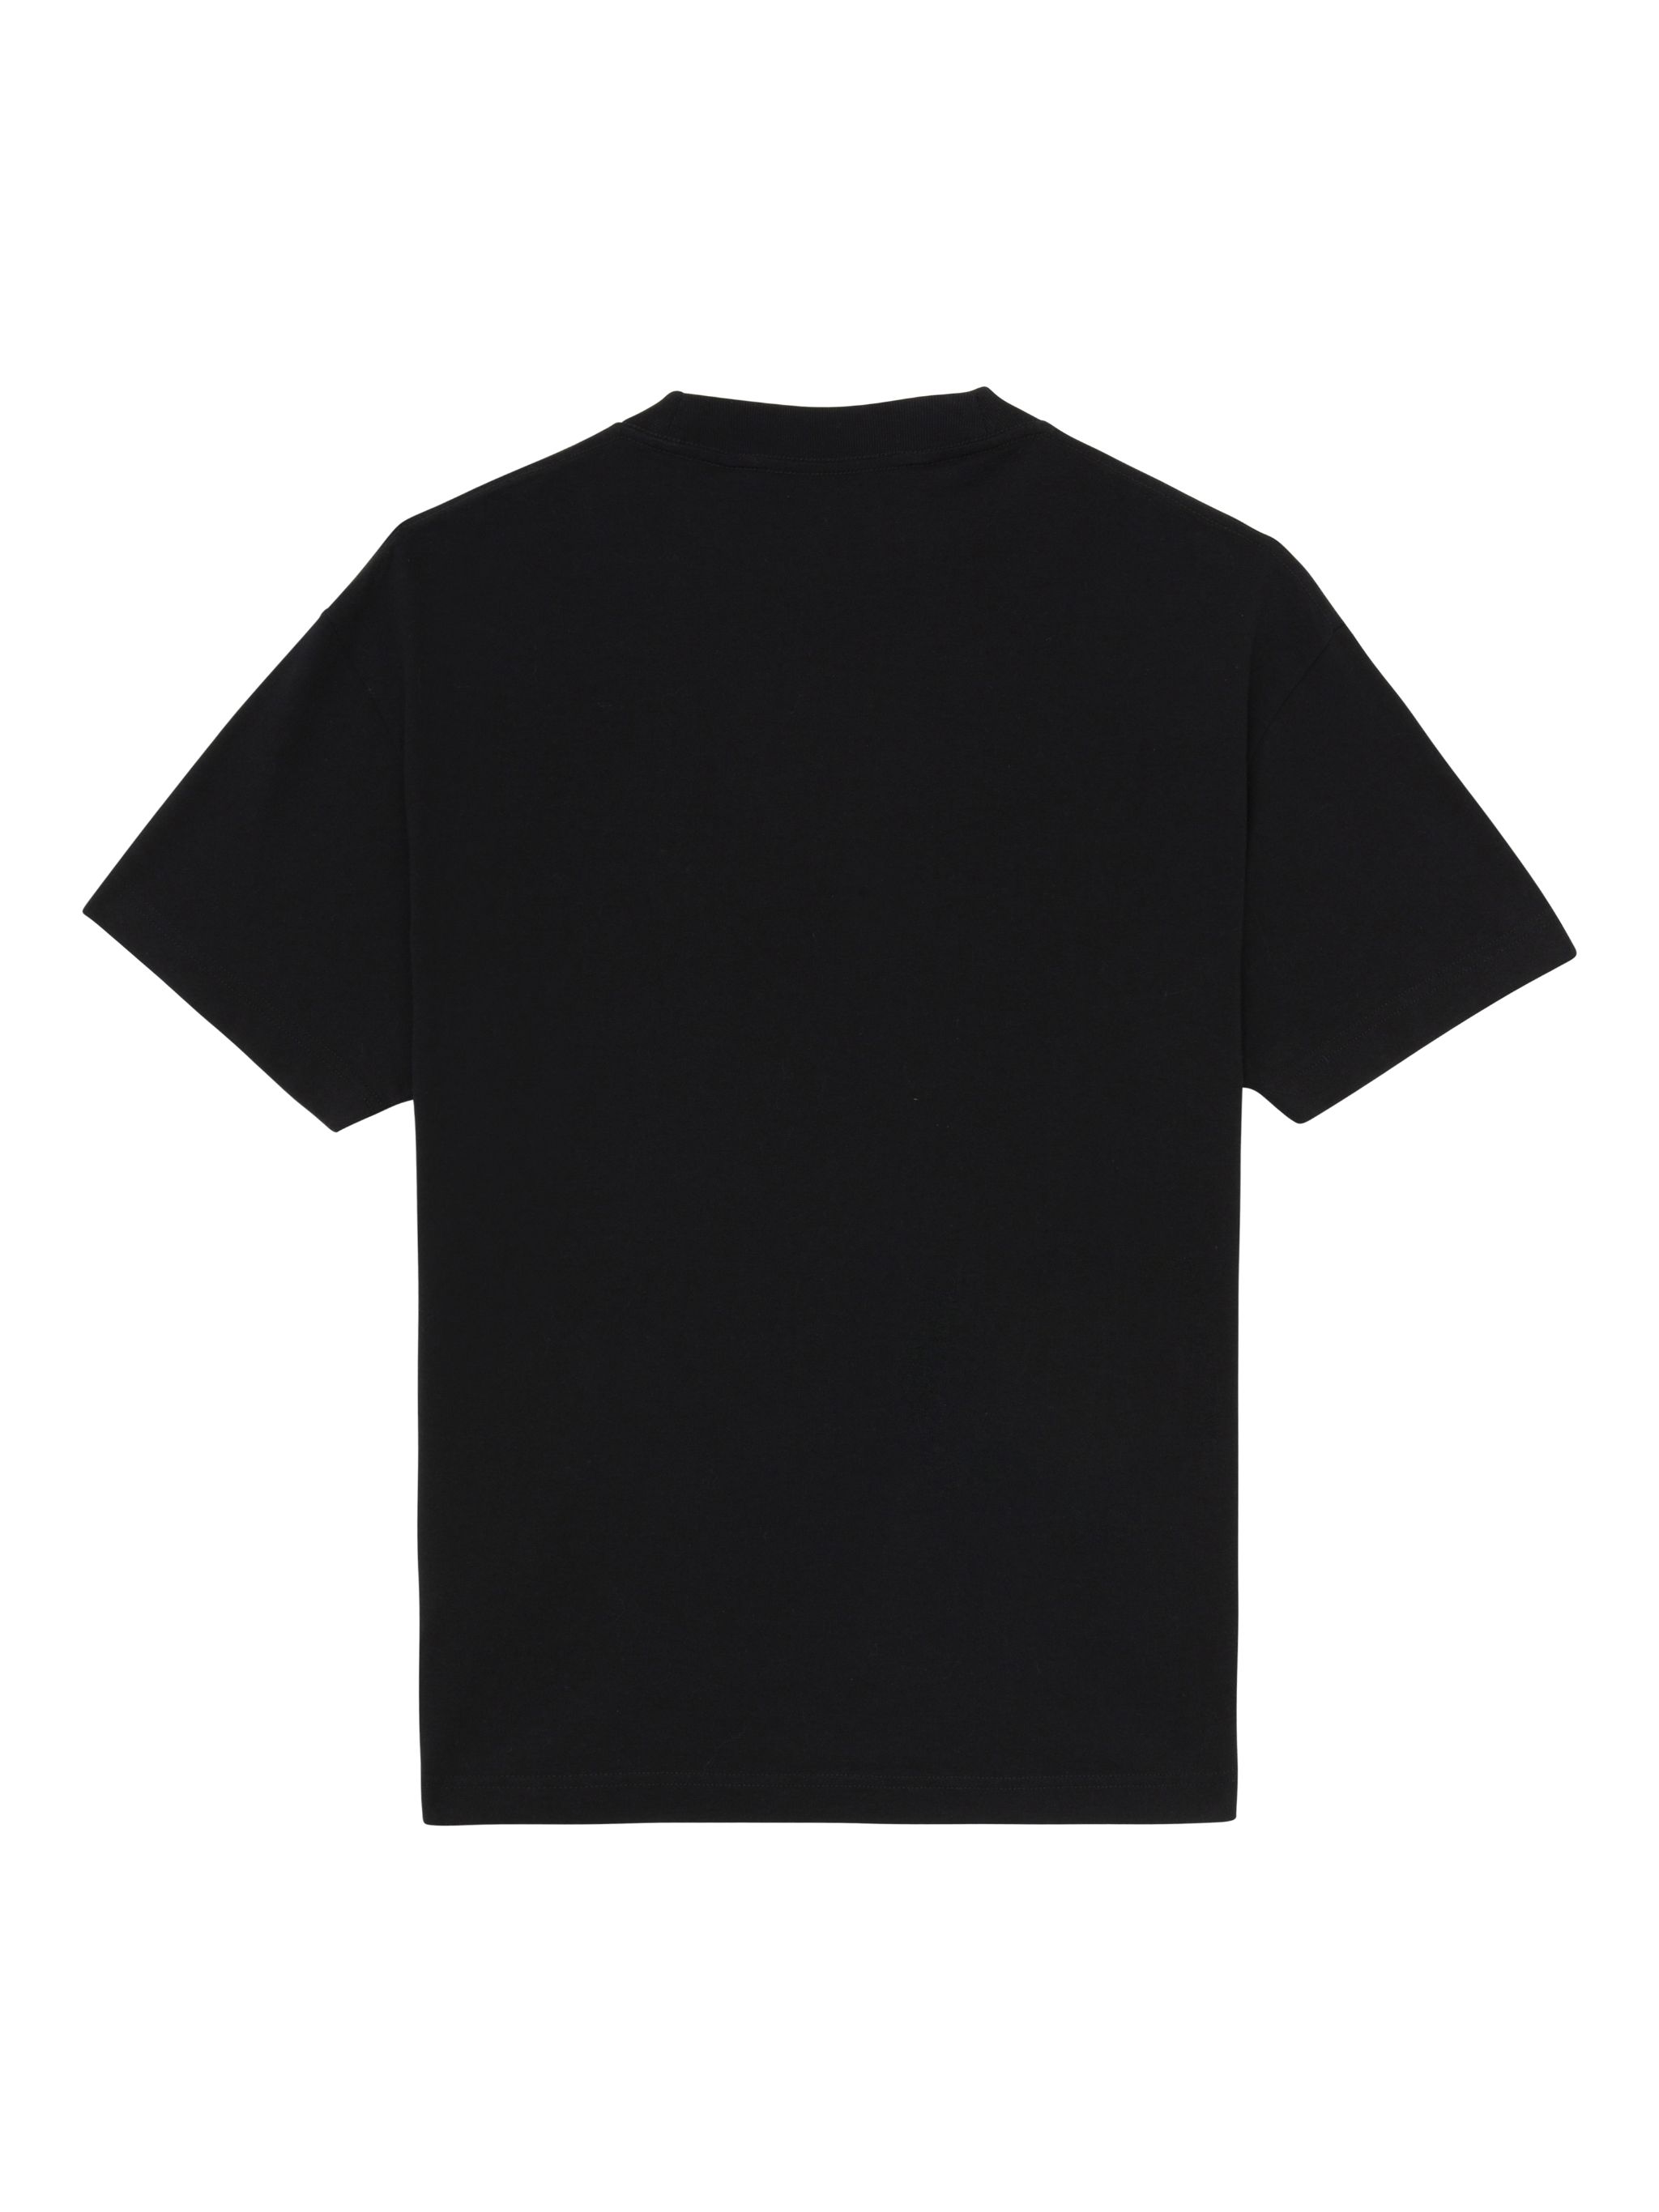 Star Sprayed T-shirt in black - Palm Angels® Official